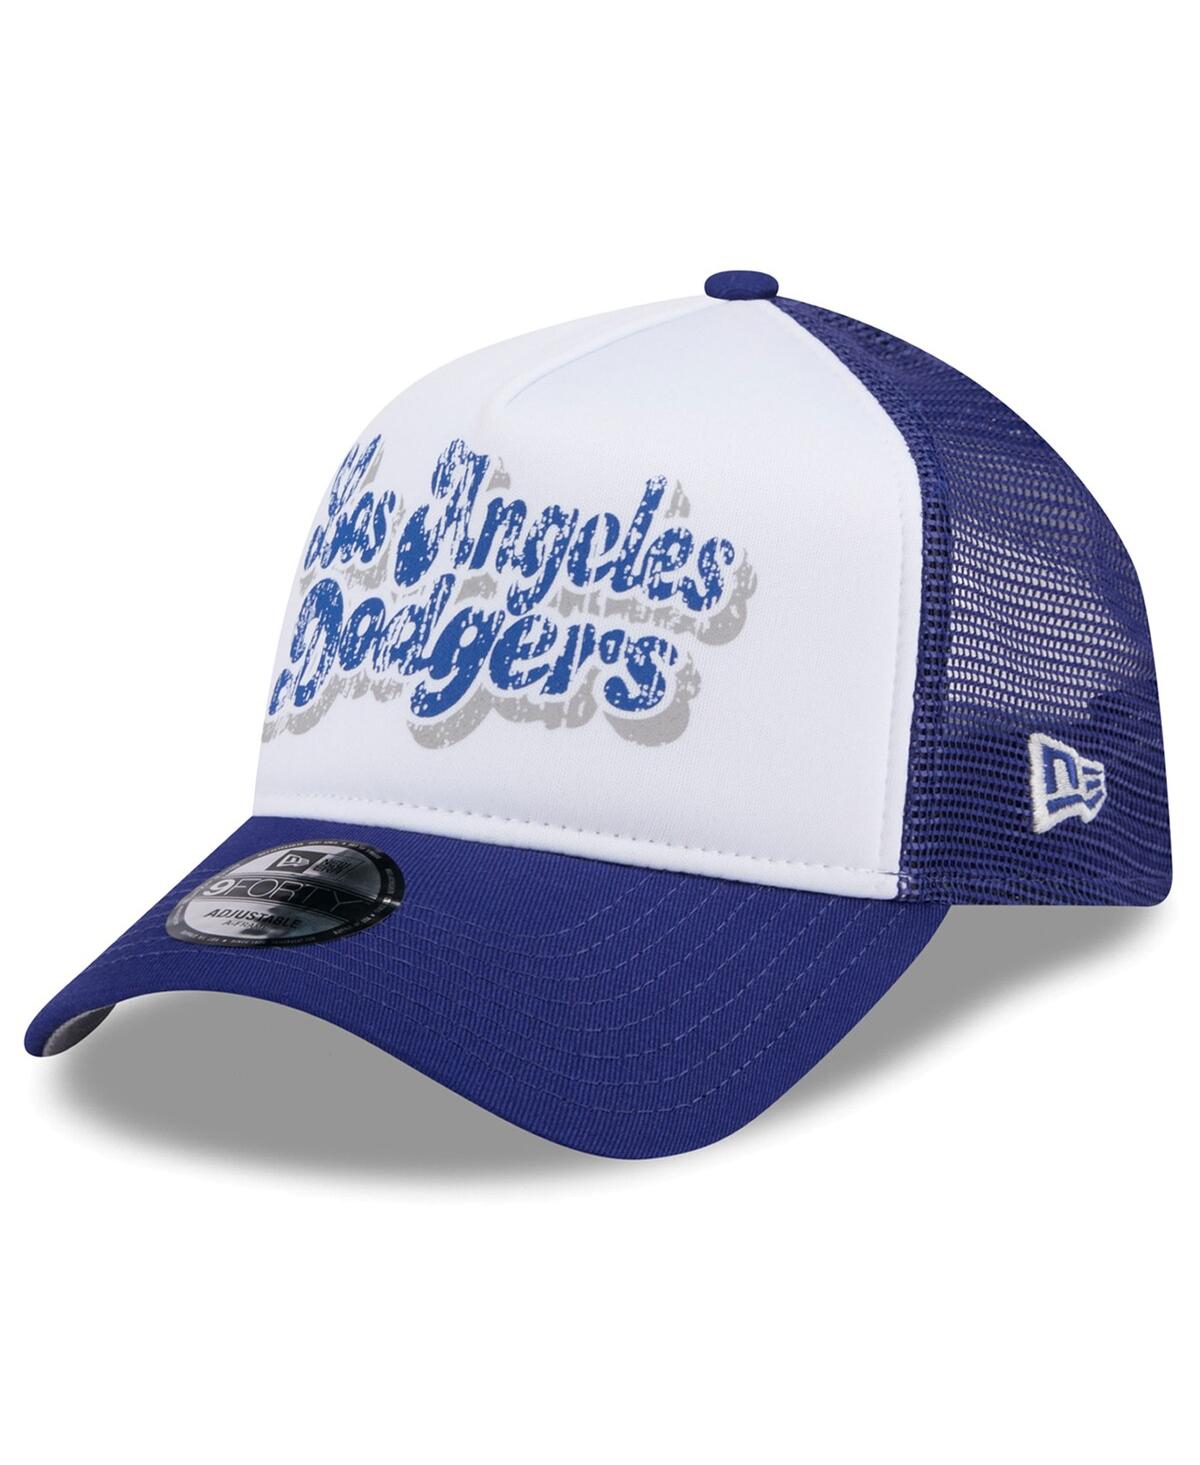 Women's White/Royal Los Angeles Dodgers Throwback Team Foam Front A-Frame Trucker 9Forty Adjustable Hat - White Roya